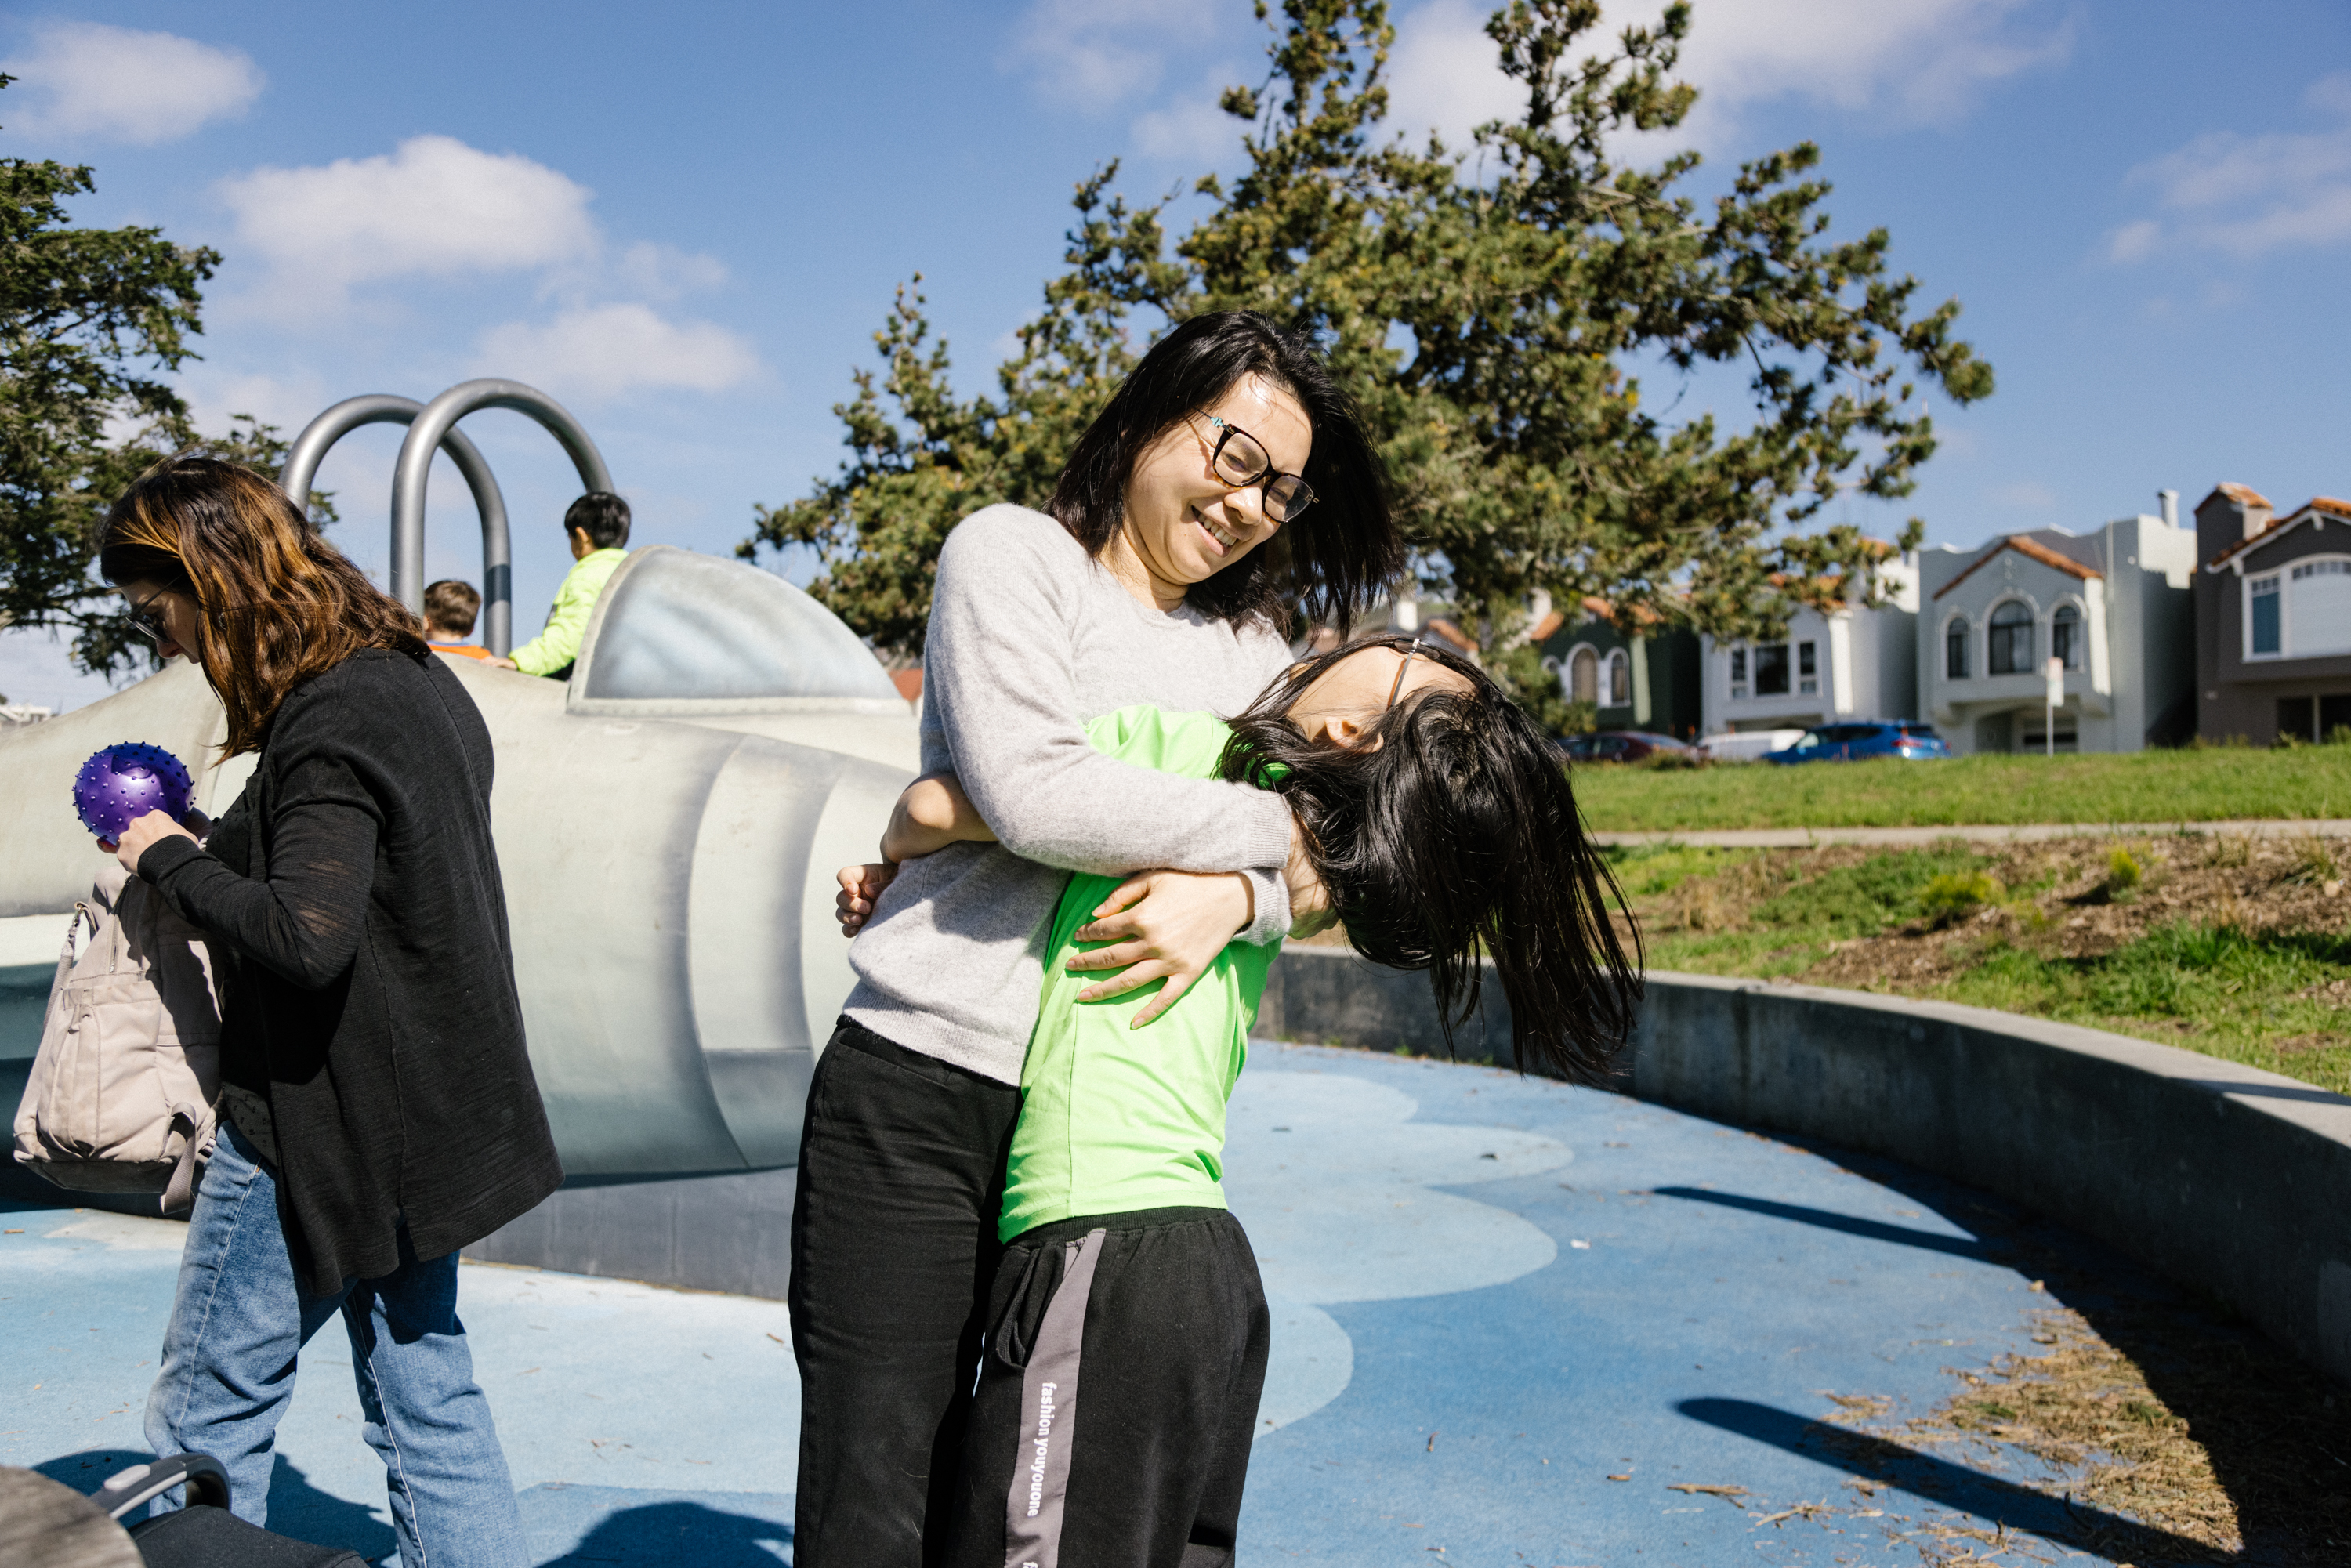 A woman hugs a joyful child at a sunny park, with others and houses in the background.